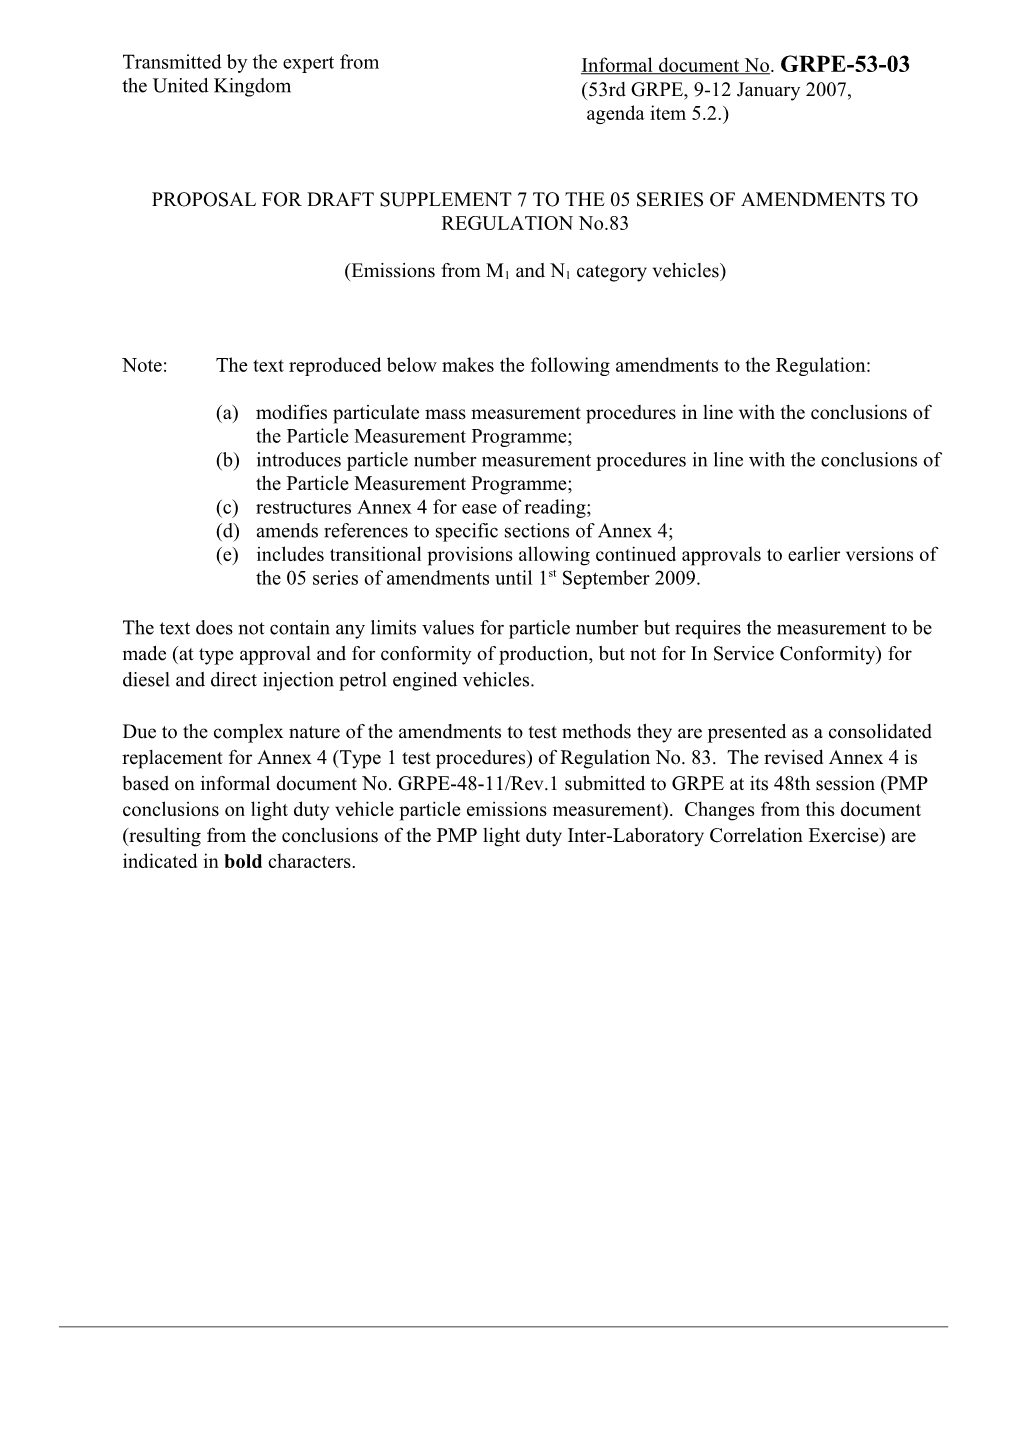 PROPOSAL for DRAFT SUPPLEMENT 7 to the 05 SERIES of AMENDMENTS to REGULATION No.83